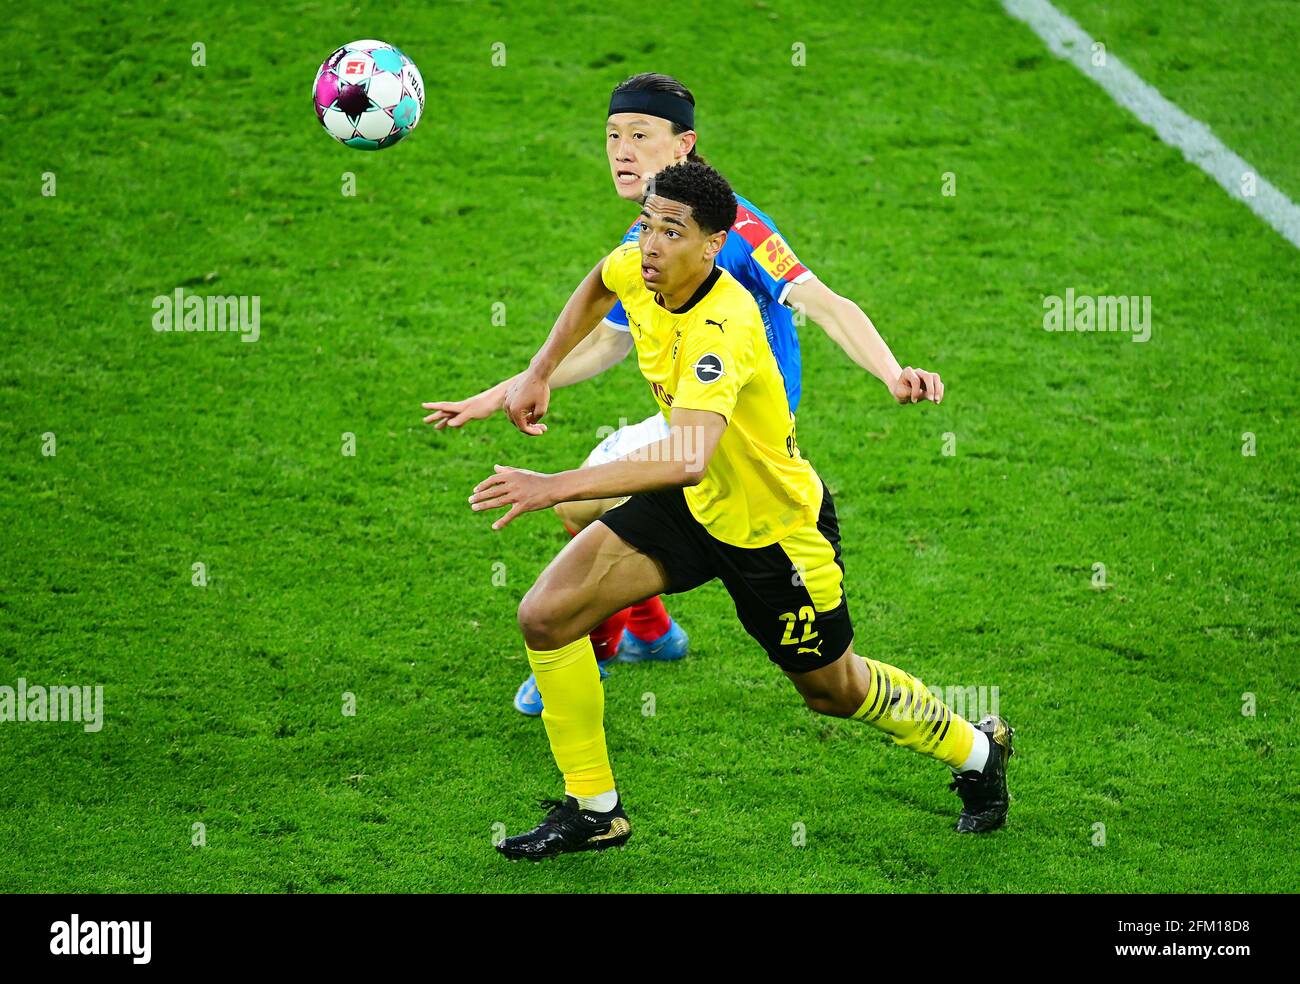 left to right Jude BELLINGHAM (DO) versus Jae Sung LEE (KI), action, duels, football DFB Pokal, semi-finals, Borussia Dortmund (DO) - Holstein Kiel (KI) 5: 0, on May 1st, 2021 in Dortmund/Germany. Photo: TimGroothuis/Witters/pool via Fotoagentur SVEN SIMON # DFB regulations prohibit any use of photographs as image sequences and/or quasi-video # Editorial Use ONLY # National and International News Agencies OUT | usage worldwide Stock Photo